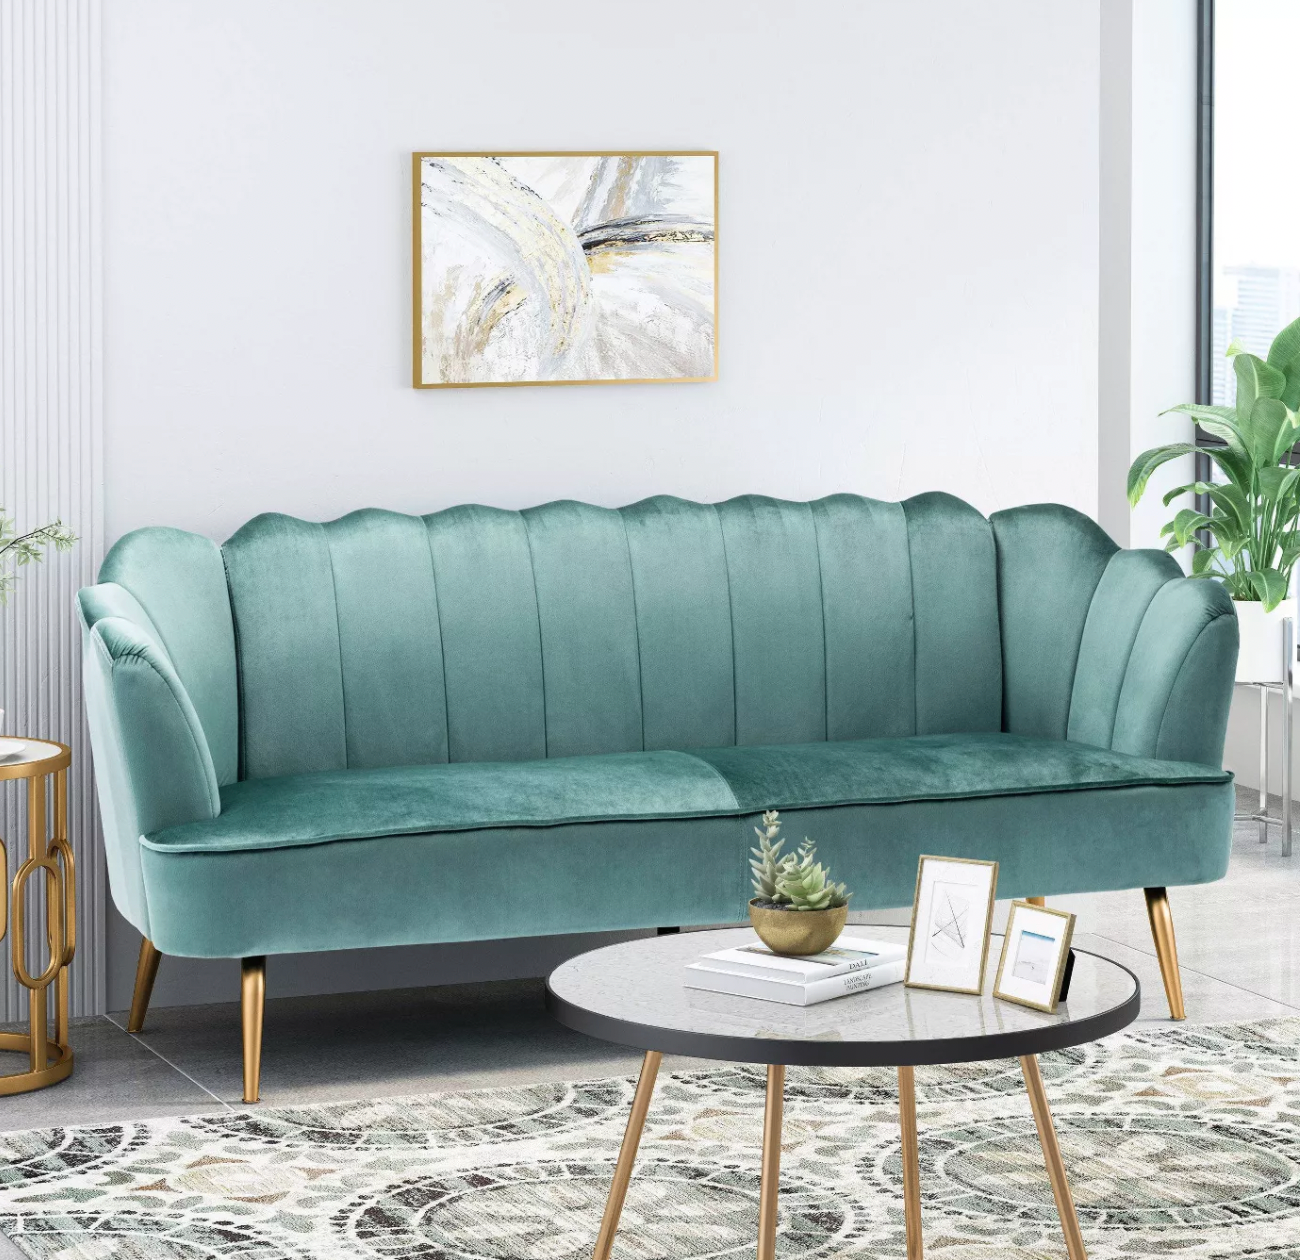 a teal velvet couch in a living room